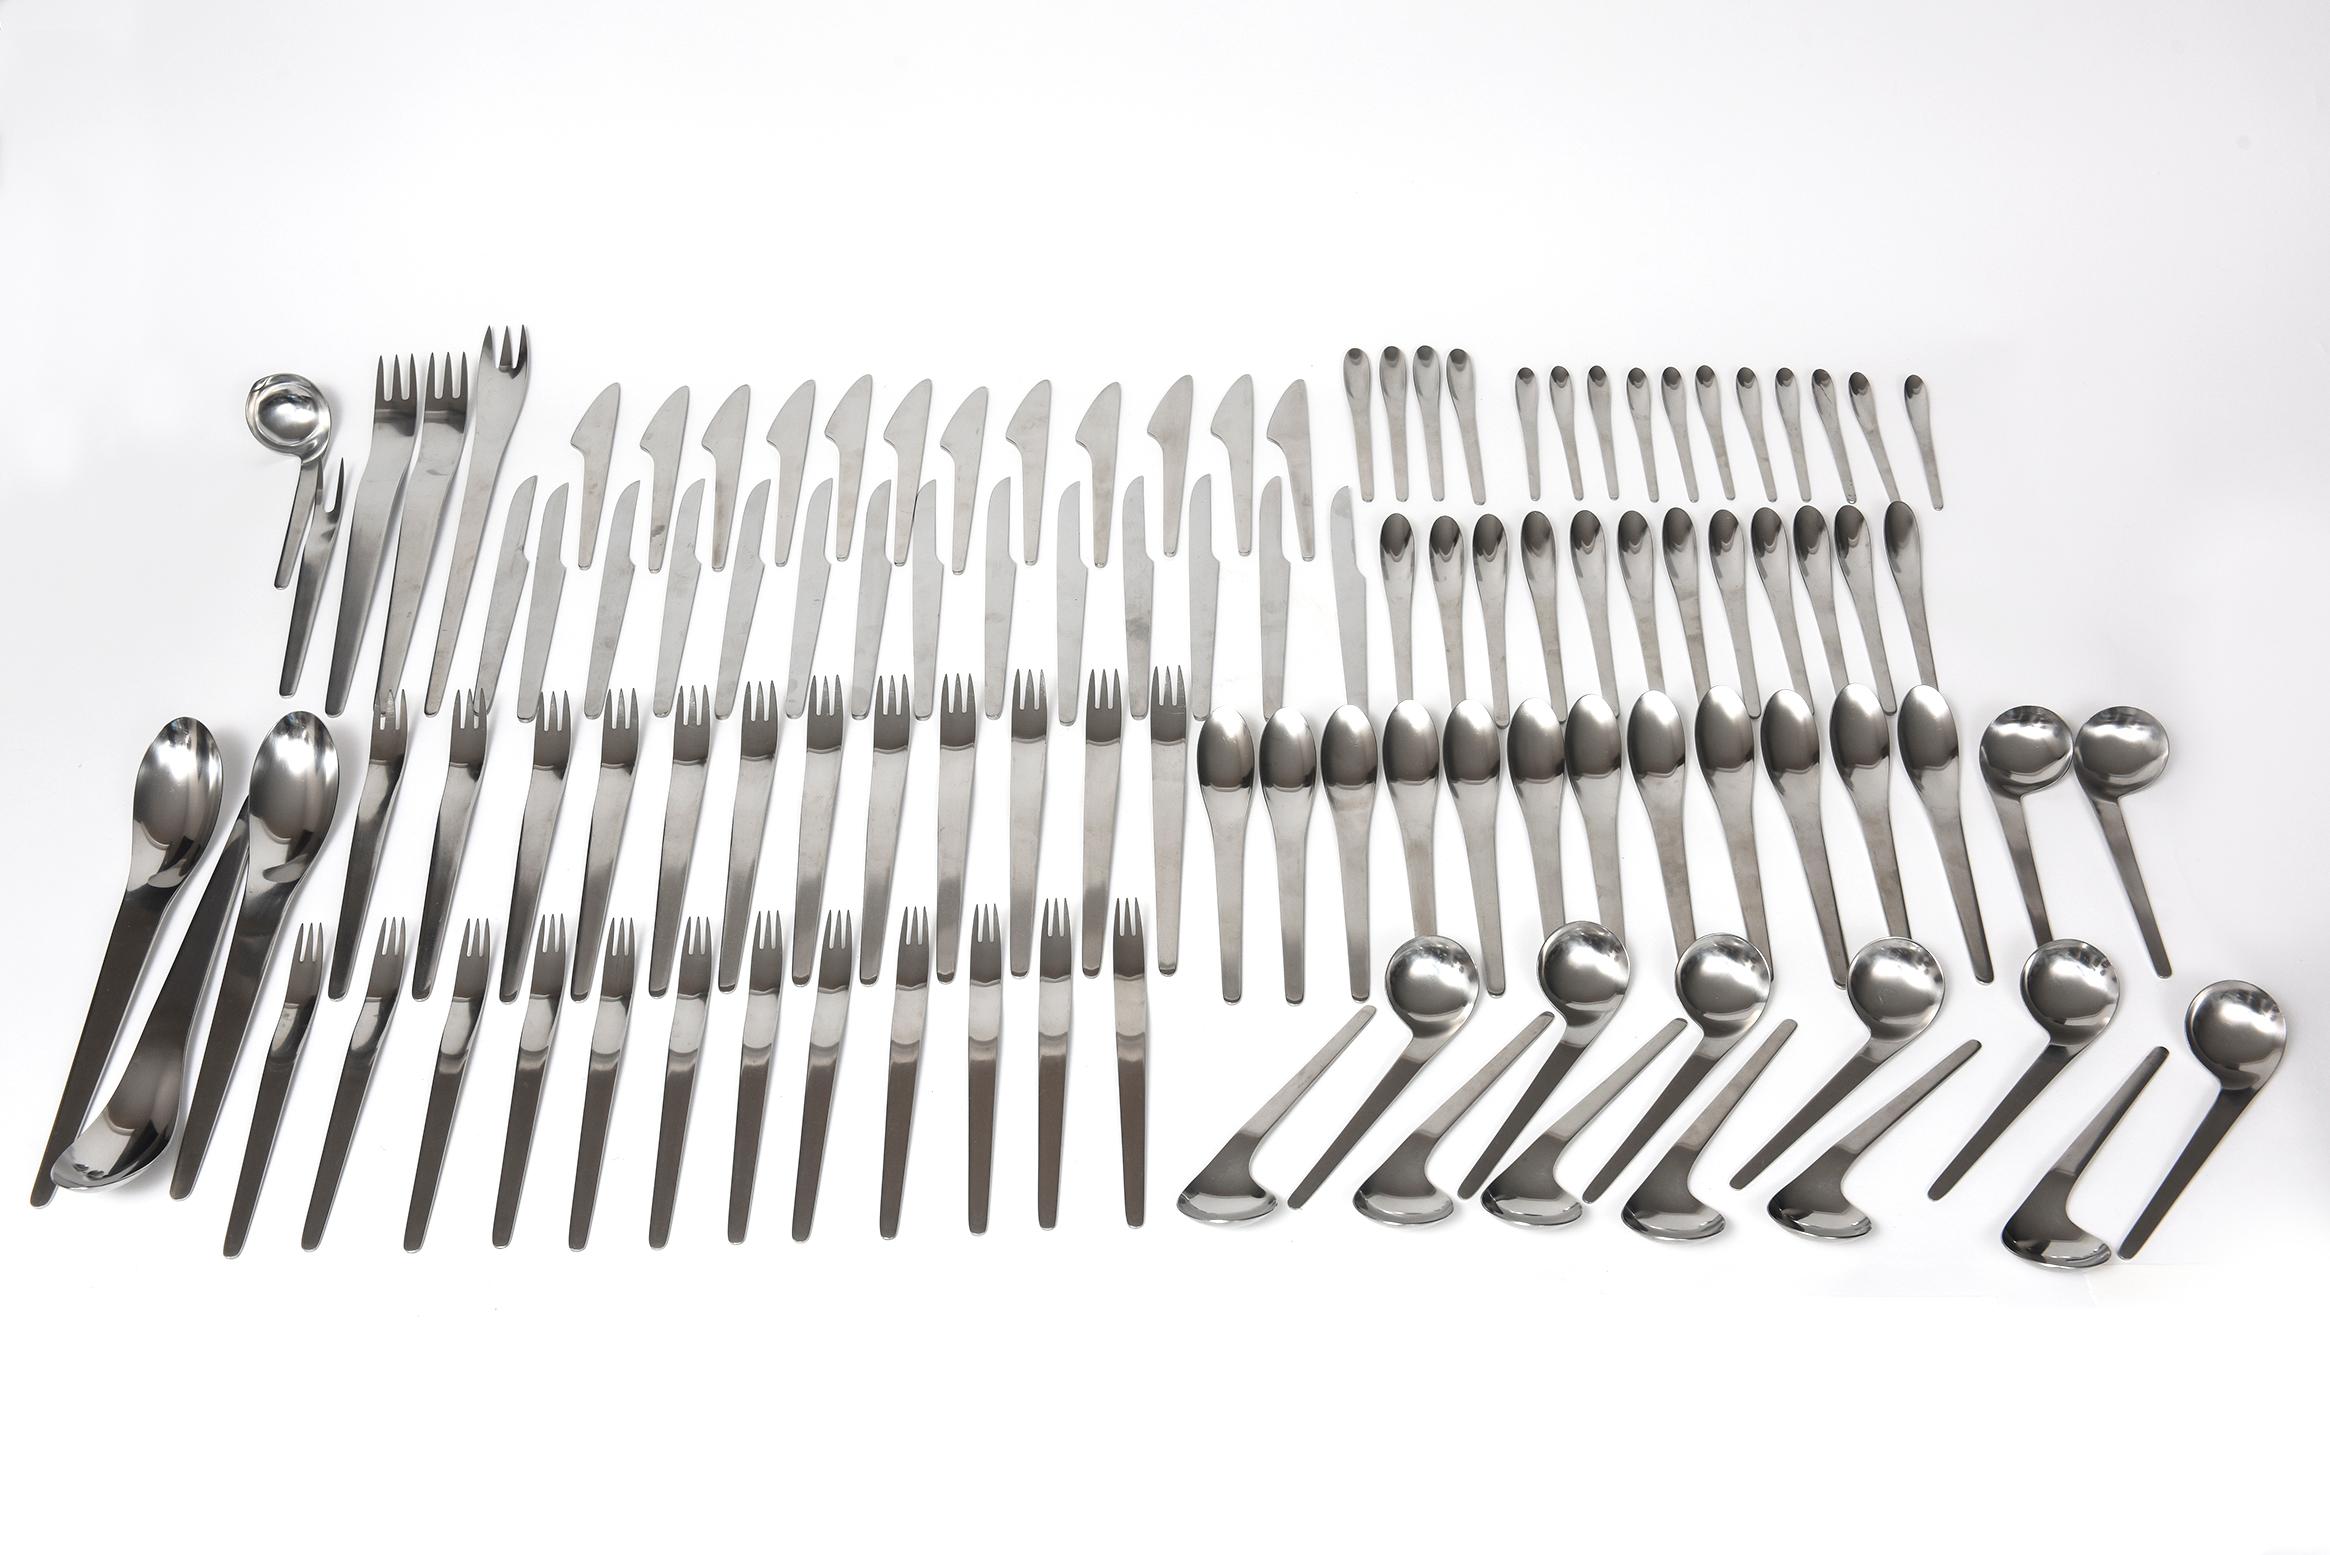 Arne Jacobsen by Michelsen Space Age Modernist Stainless Flatware Set 106 Pieces